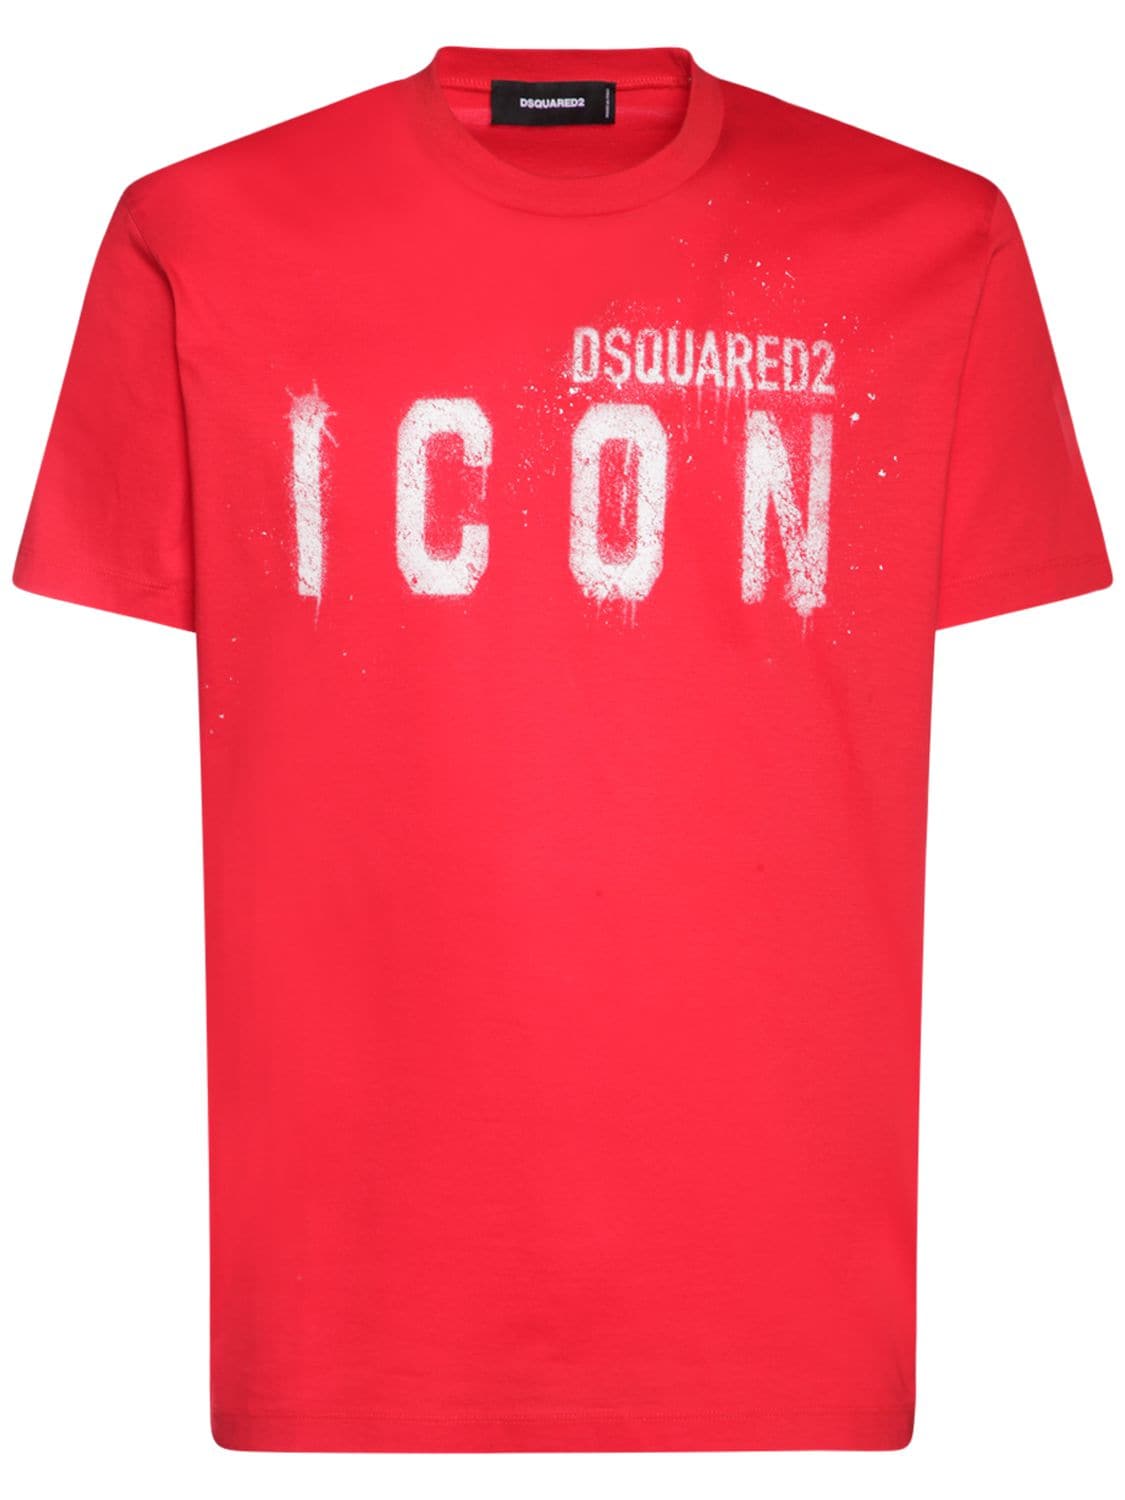 DSQUARED2 ICON SPRAY PRINTED COTTON JERSEY T-SHIRT,75IS3C010-MZEY0